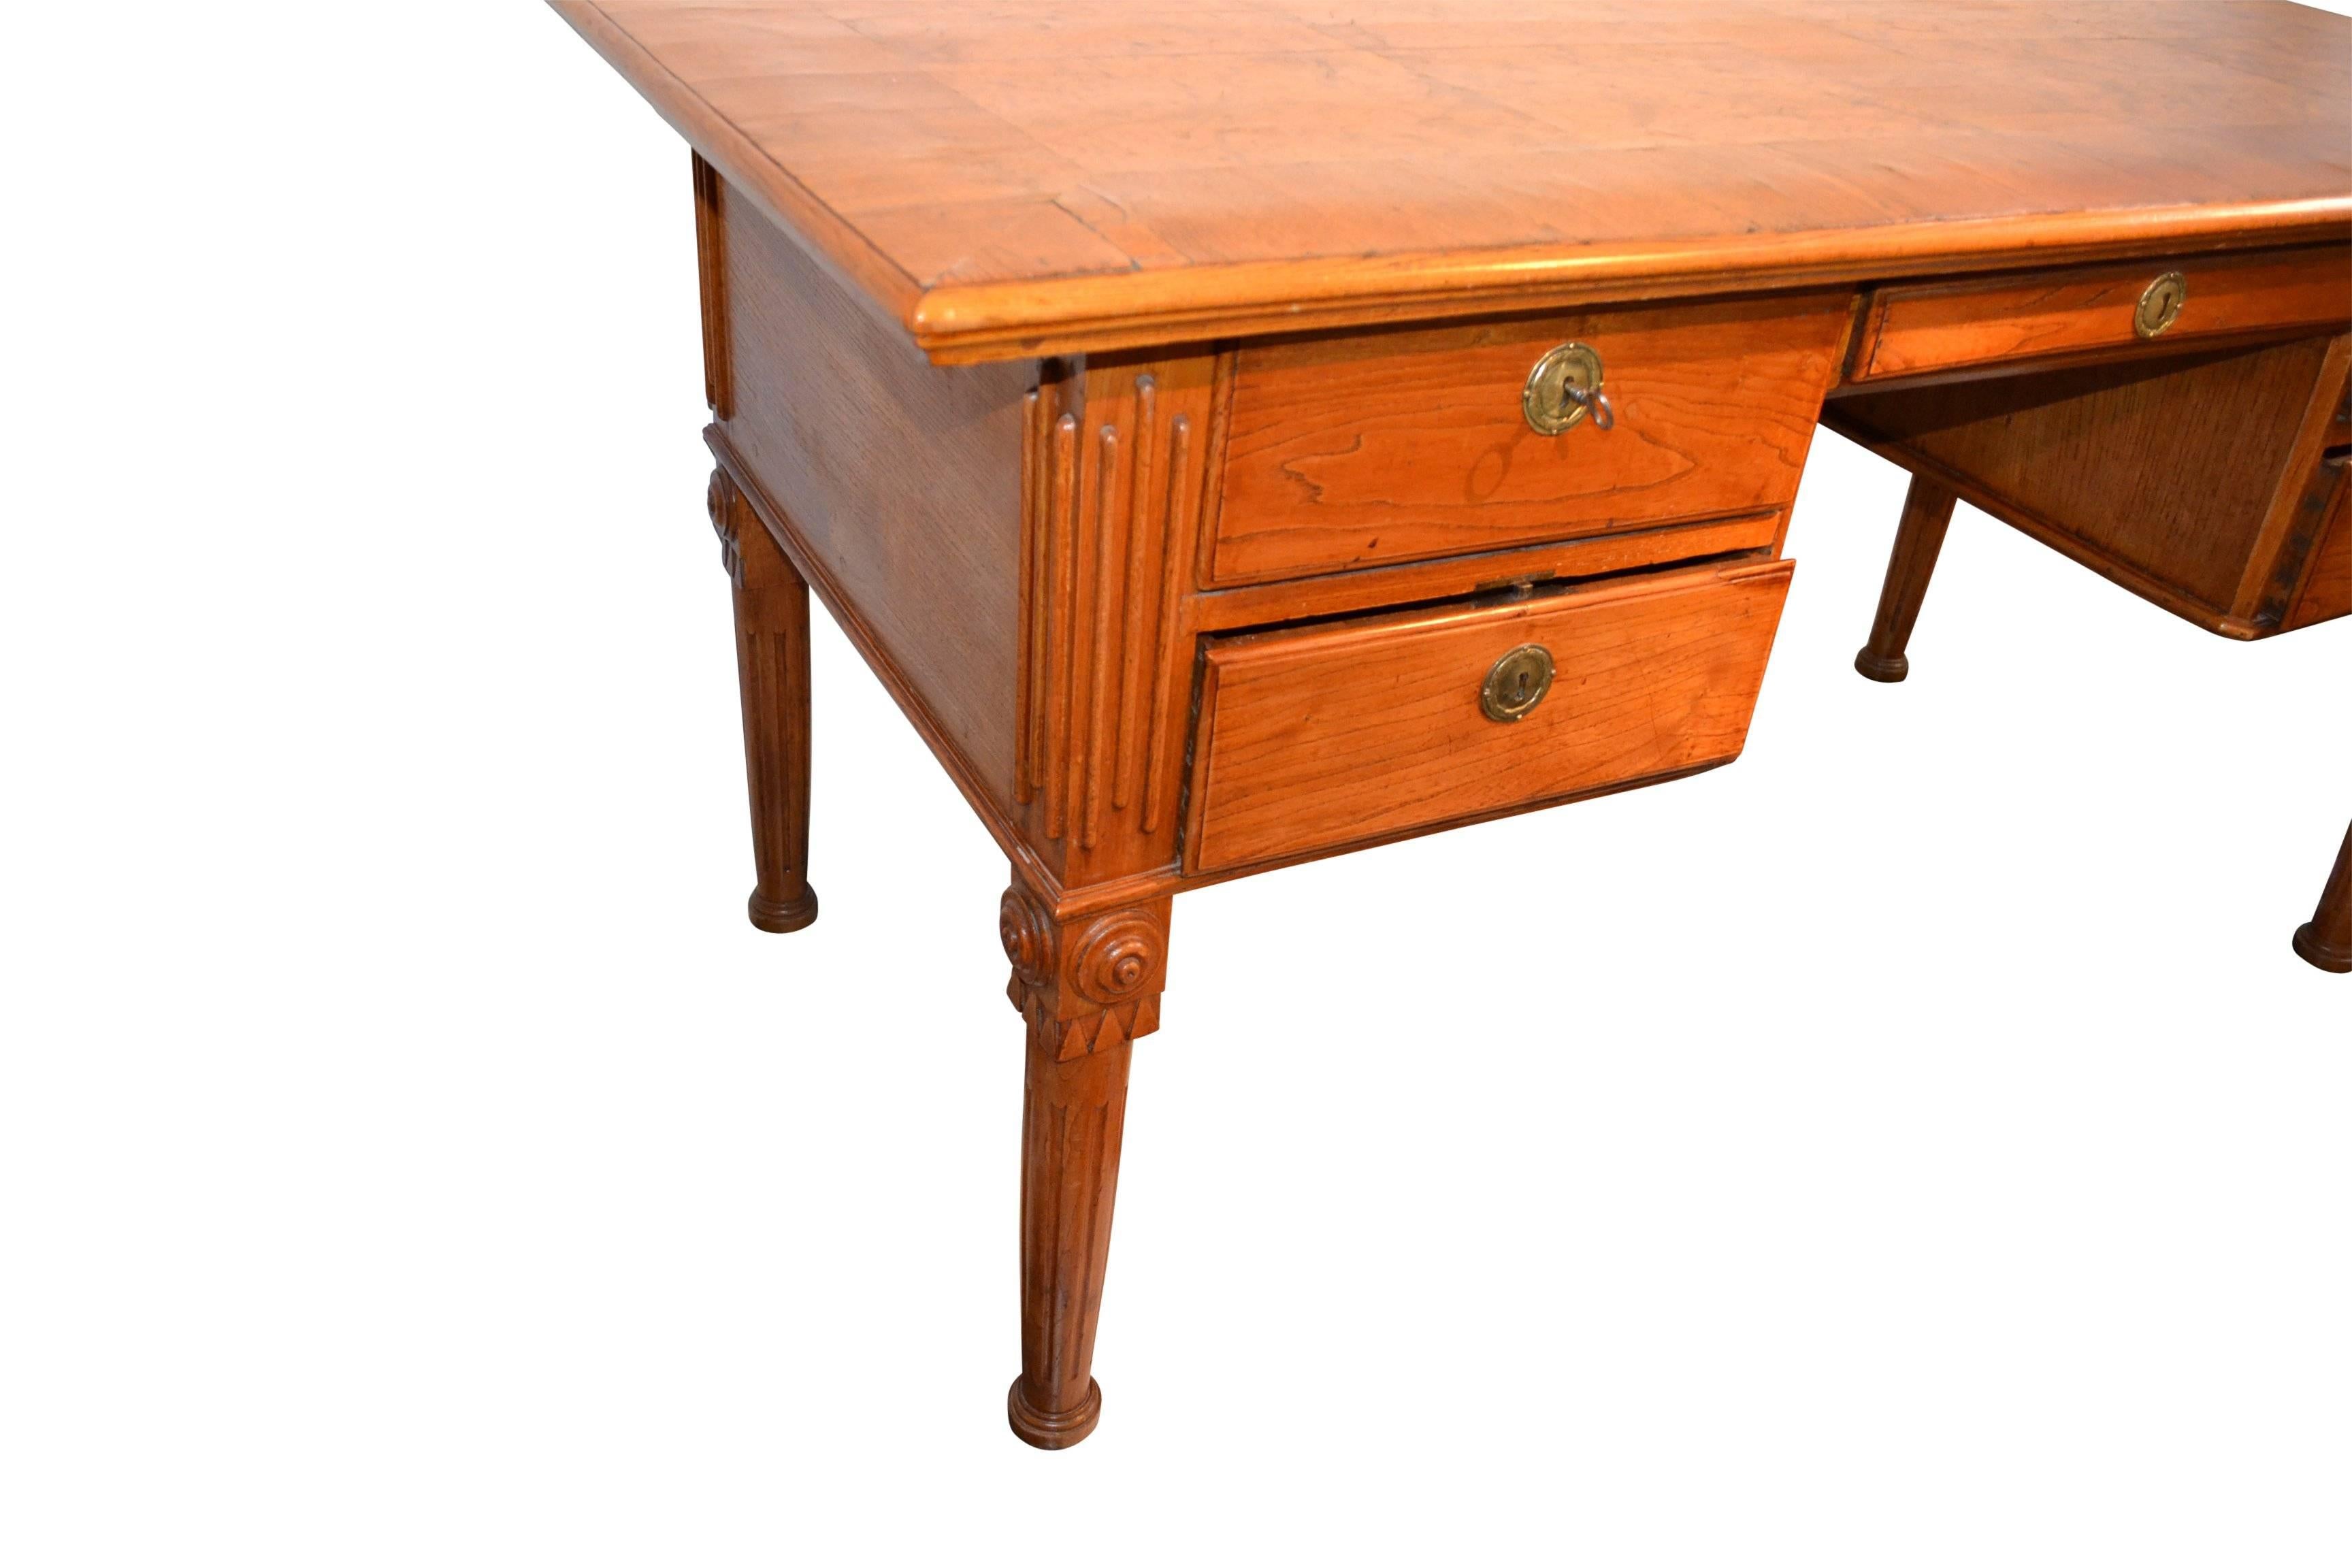 Danish 18th Century Writing Desk By Royal Architect C. F. Harsdorff In Good Condition For Sale In Haddonfield, NJ